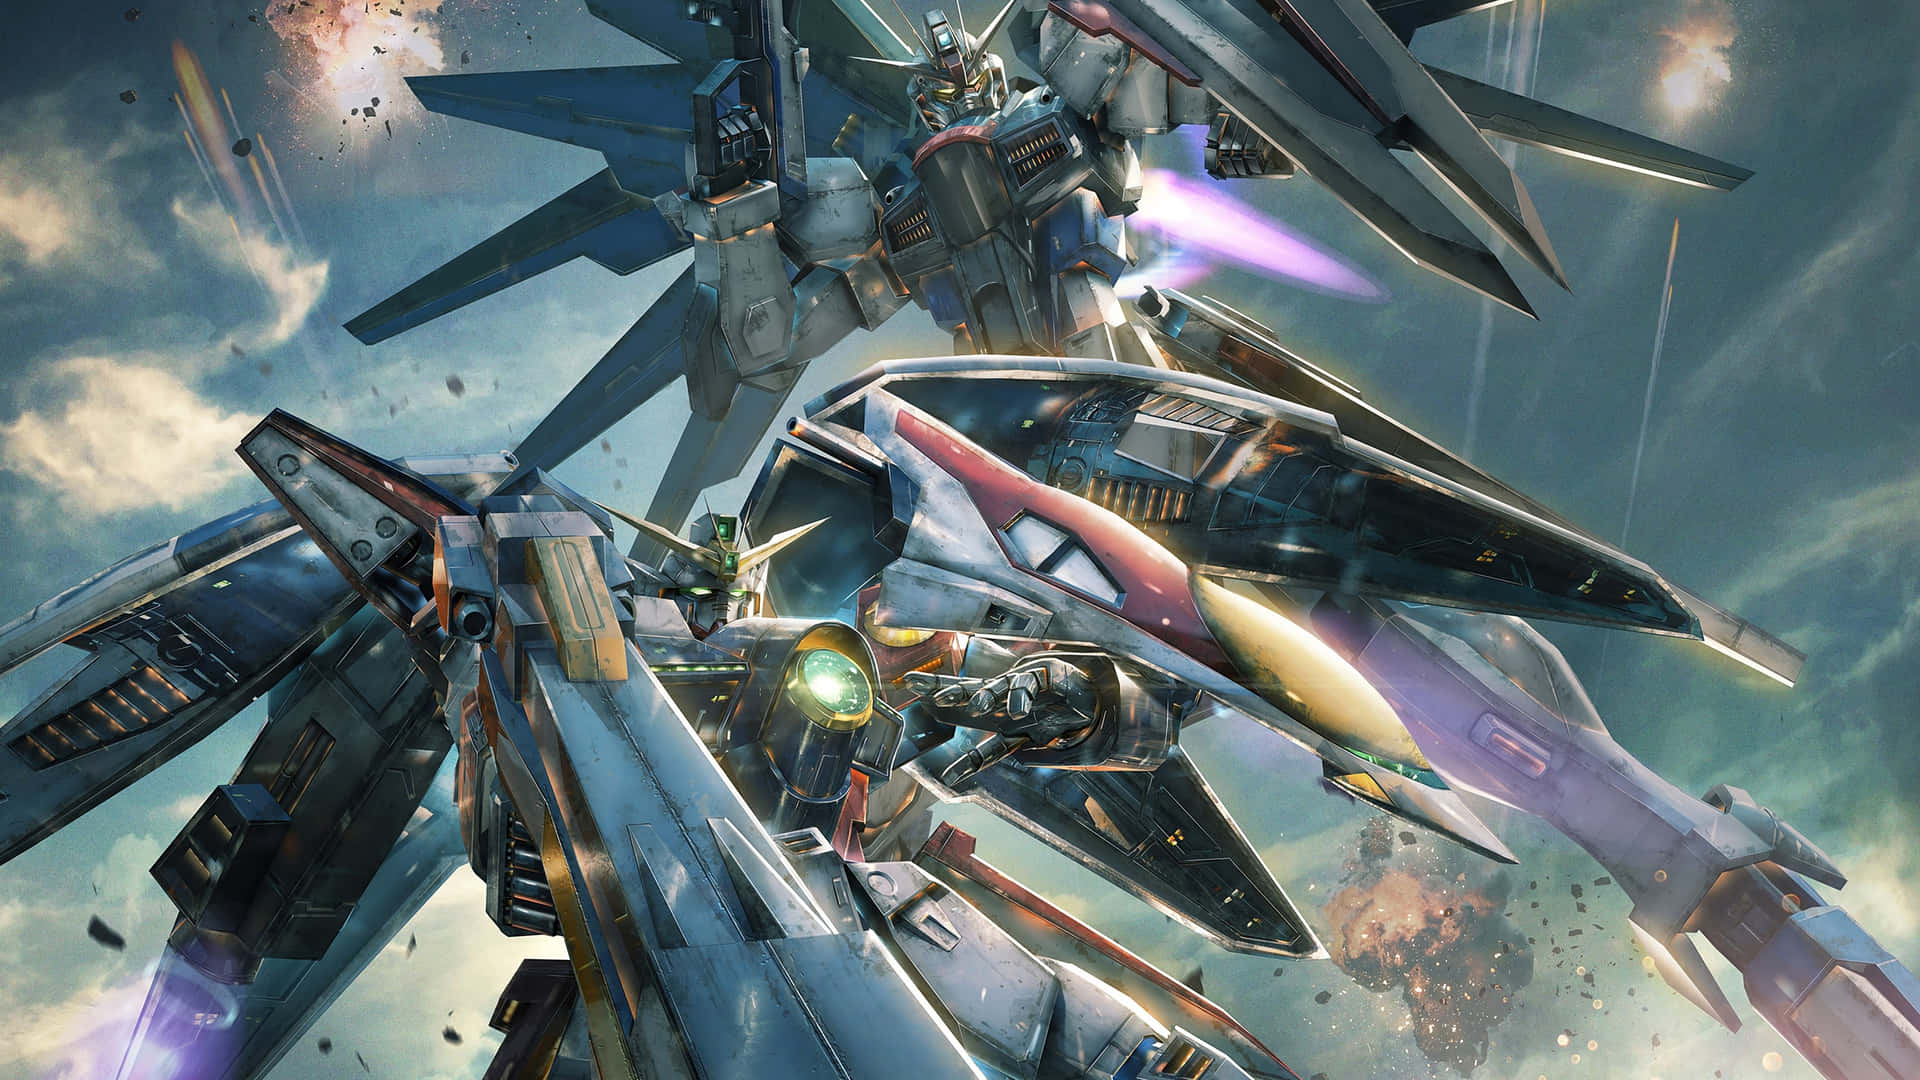 Experience the Epic Action of Gundam with These Incredible 4K Images Wallpaper